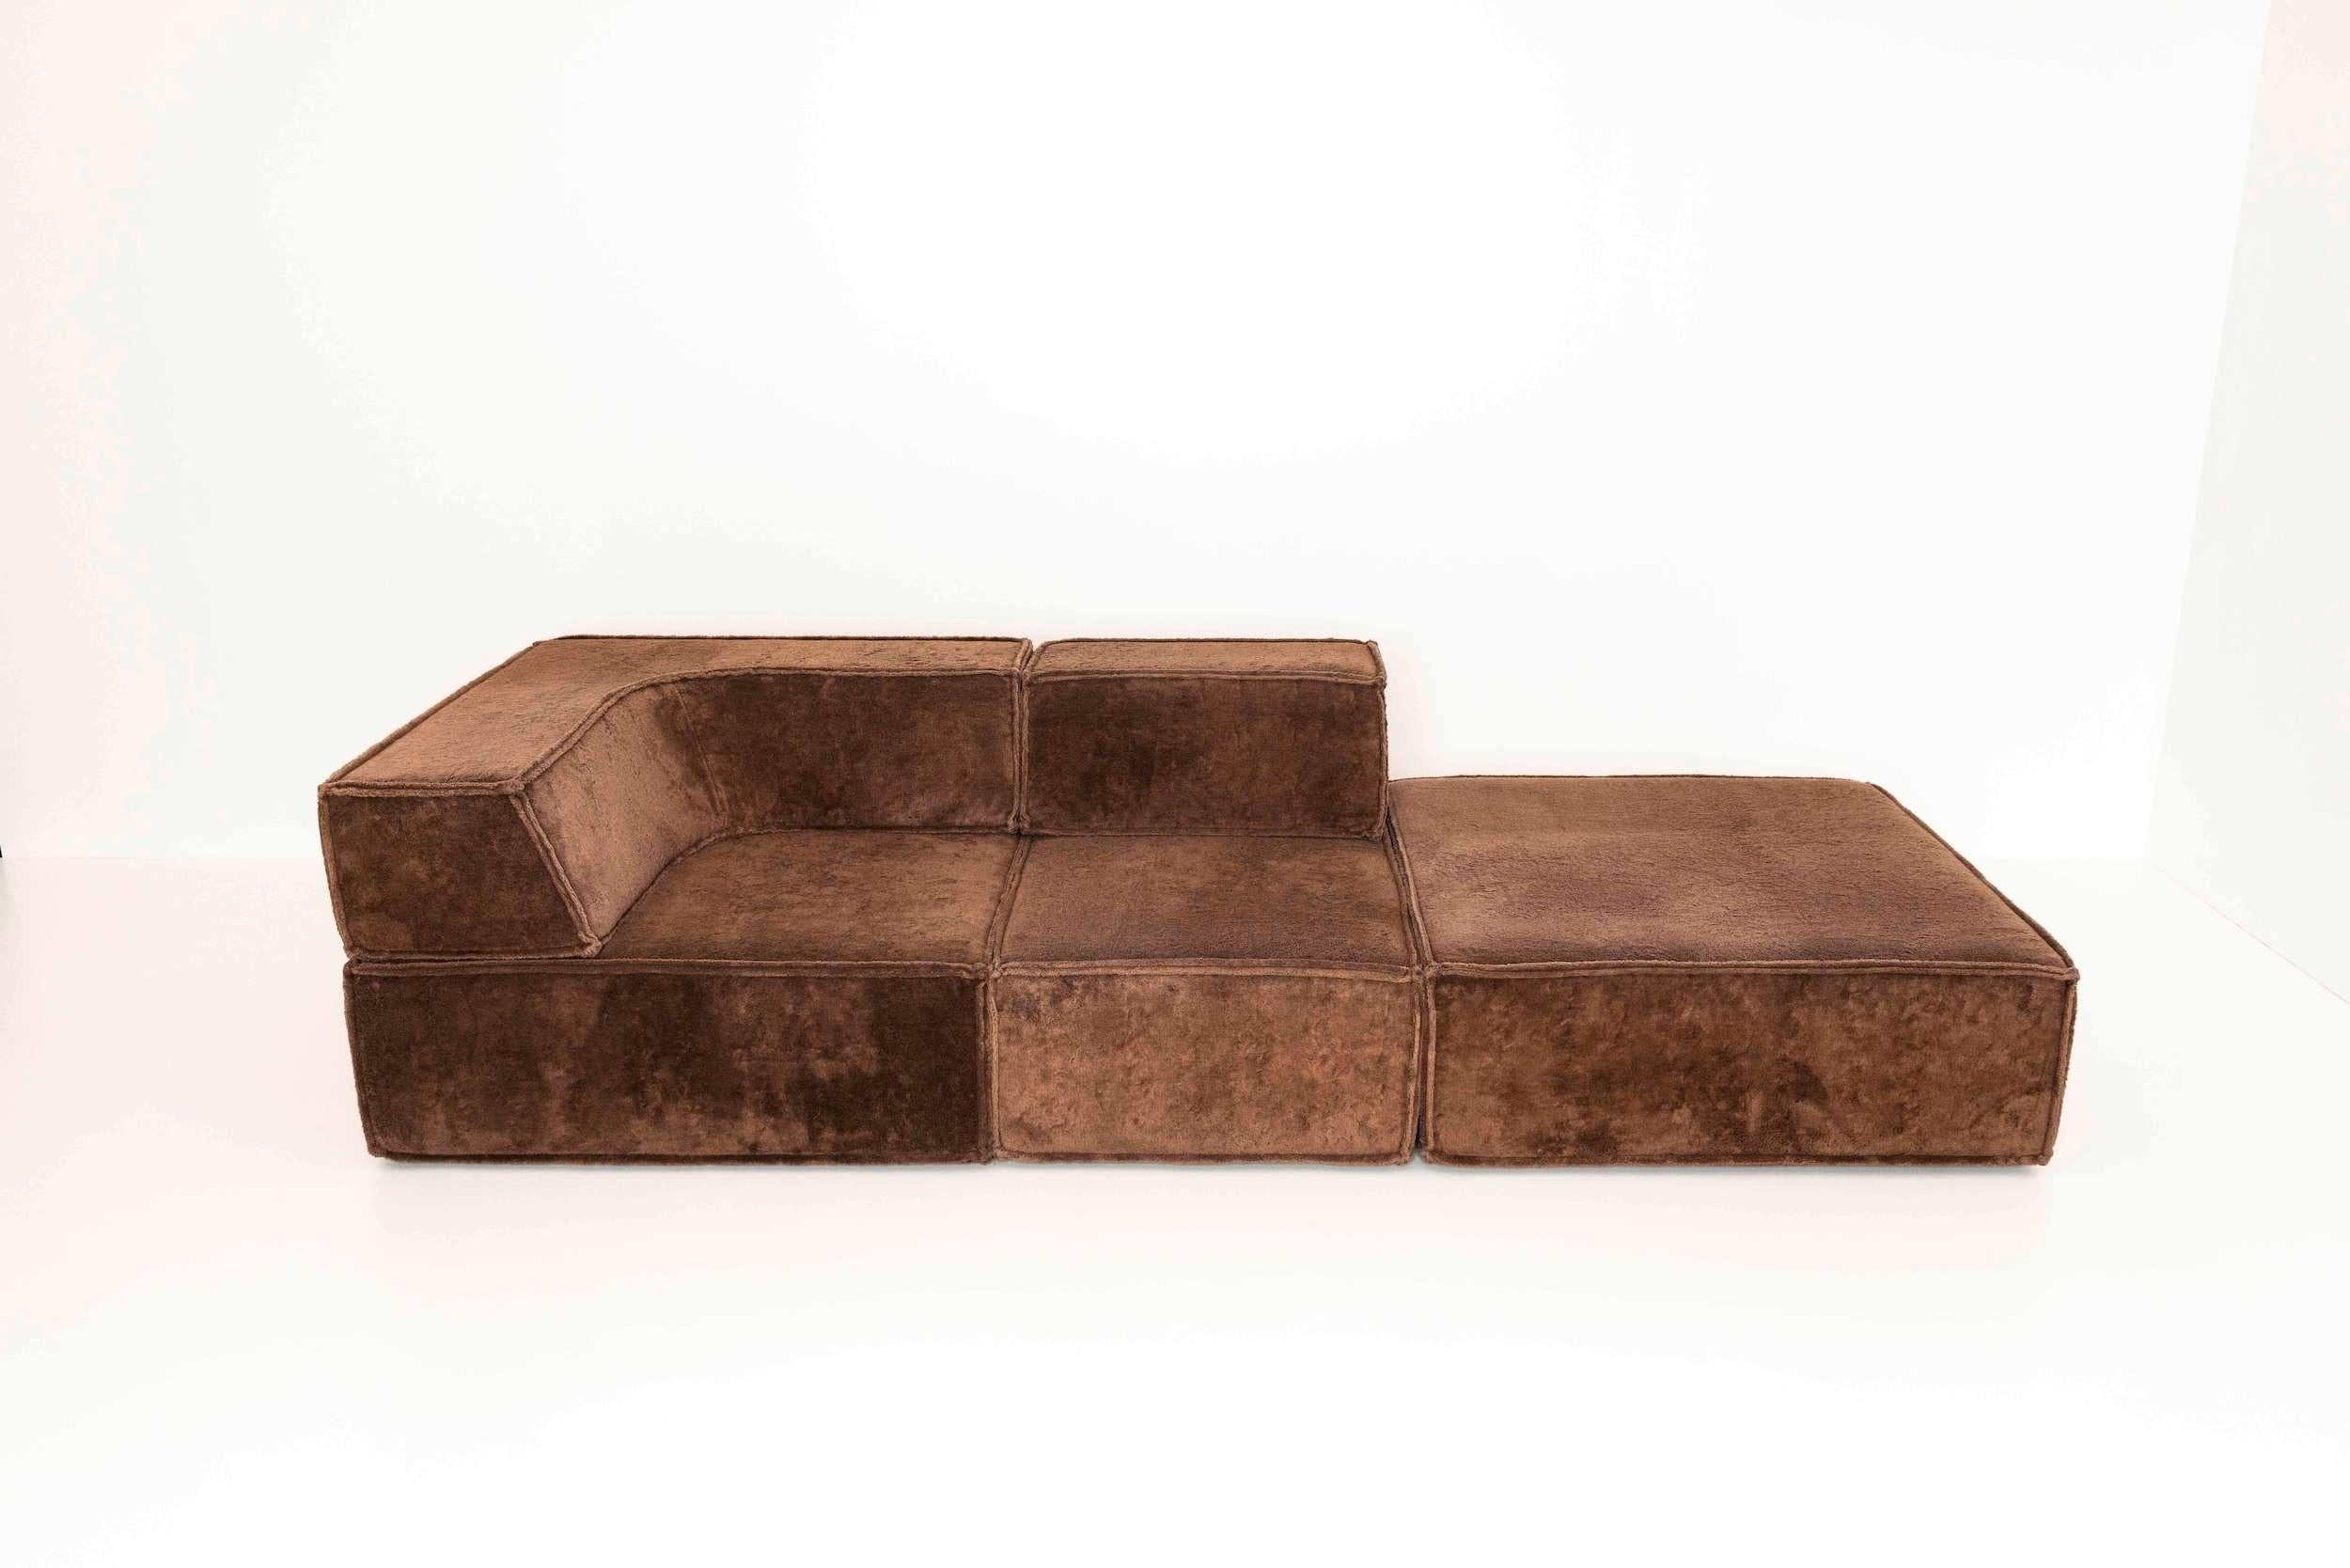 Late 20th Century Modular Sofa in Teddy Fabric by Team Form AG for COR, Germany 1970s